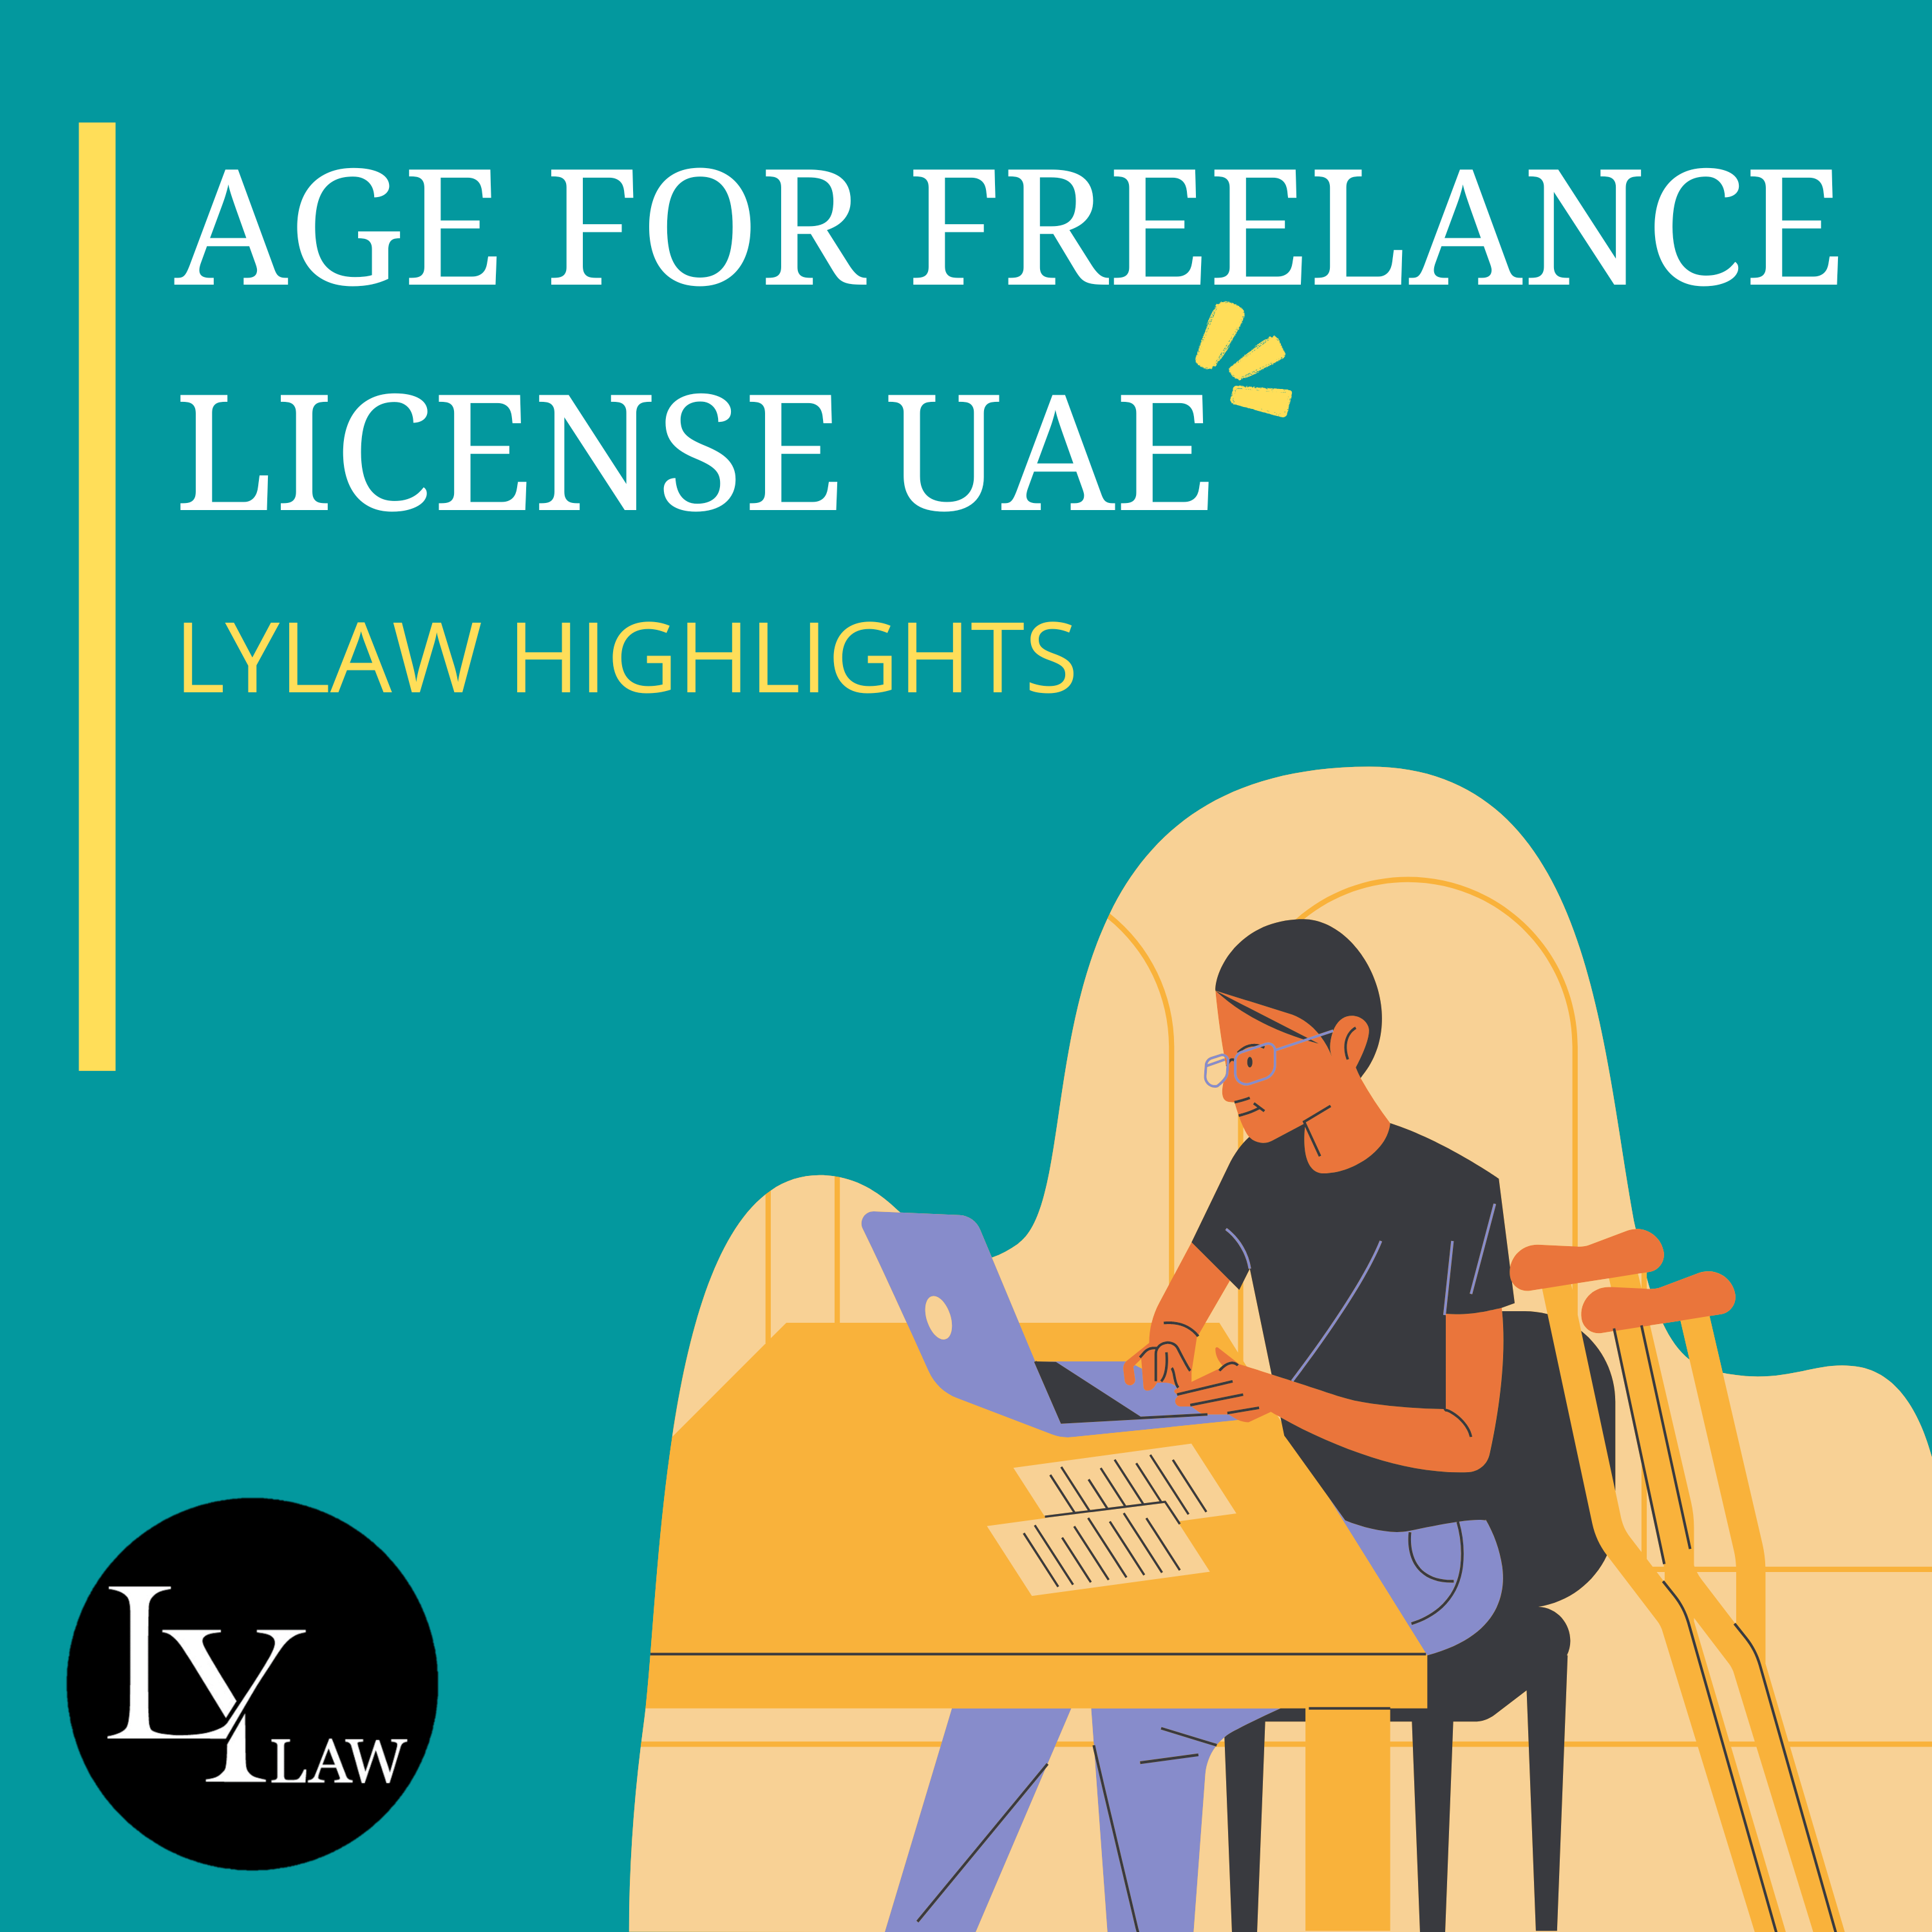 Age for Freelance License in UAE